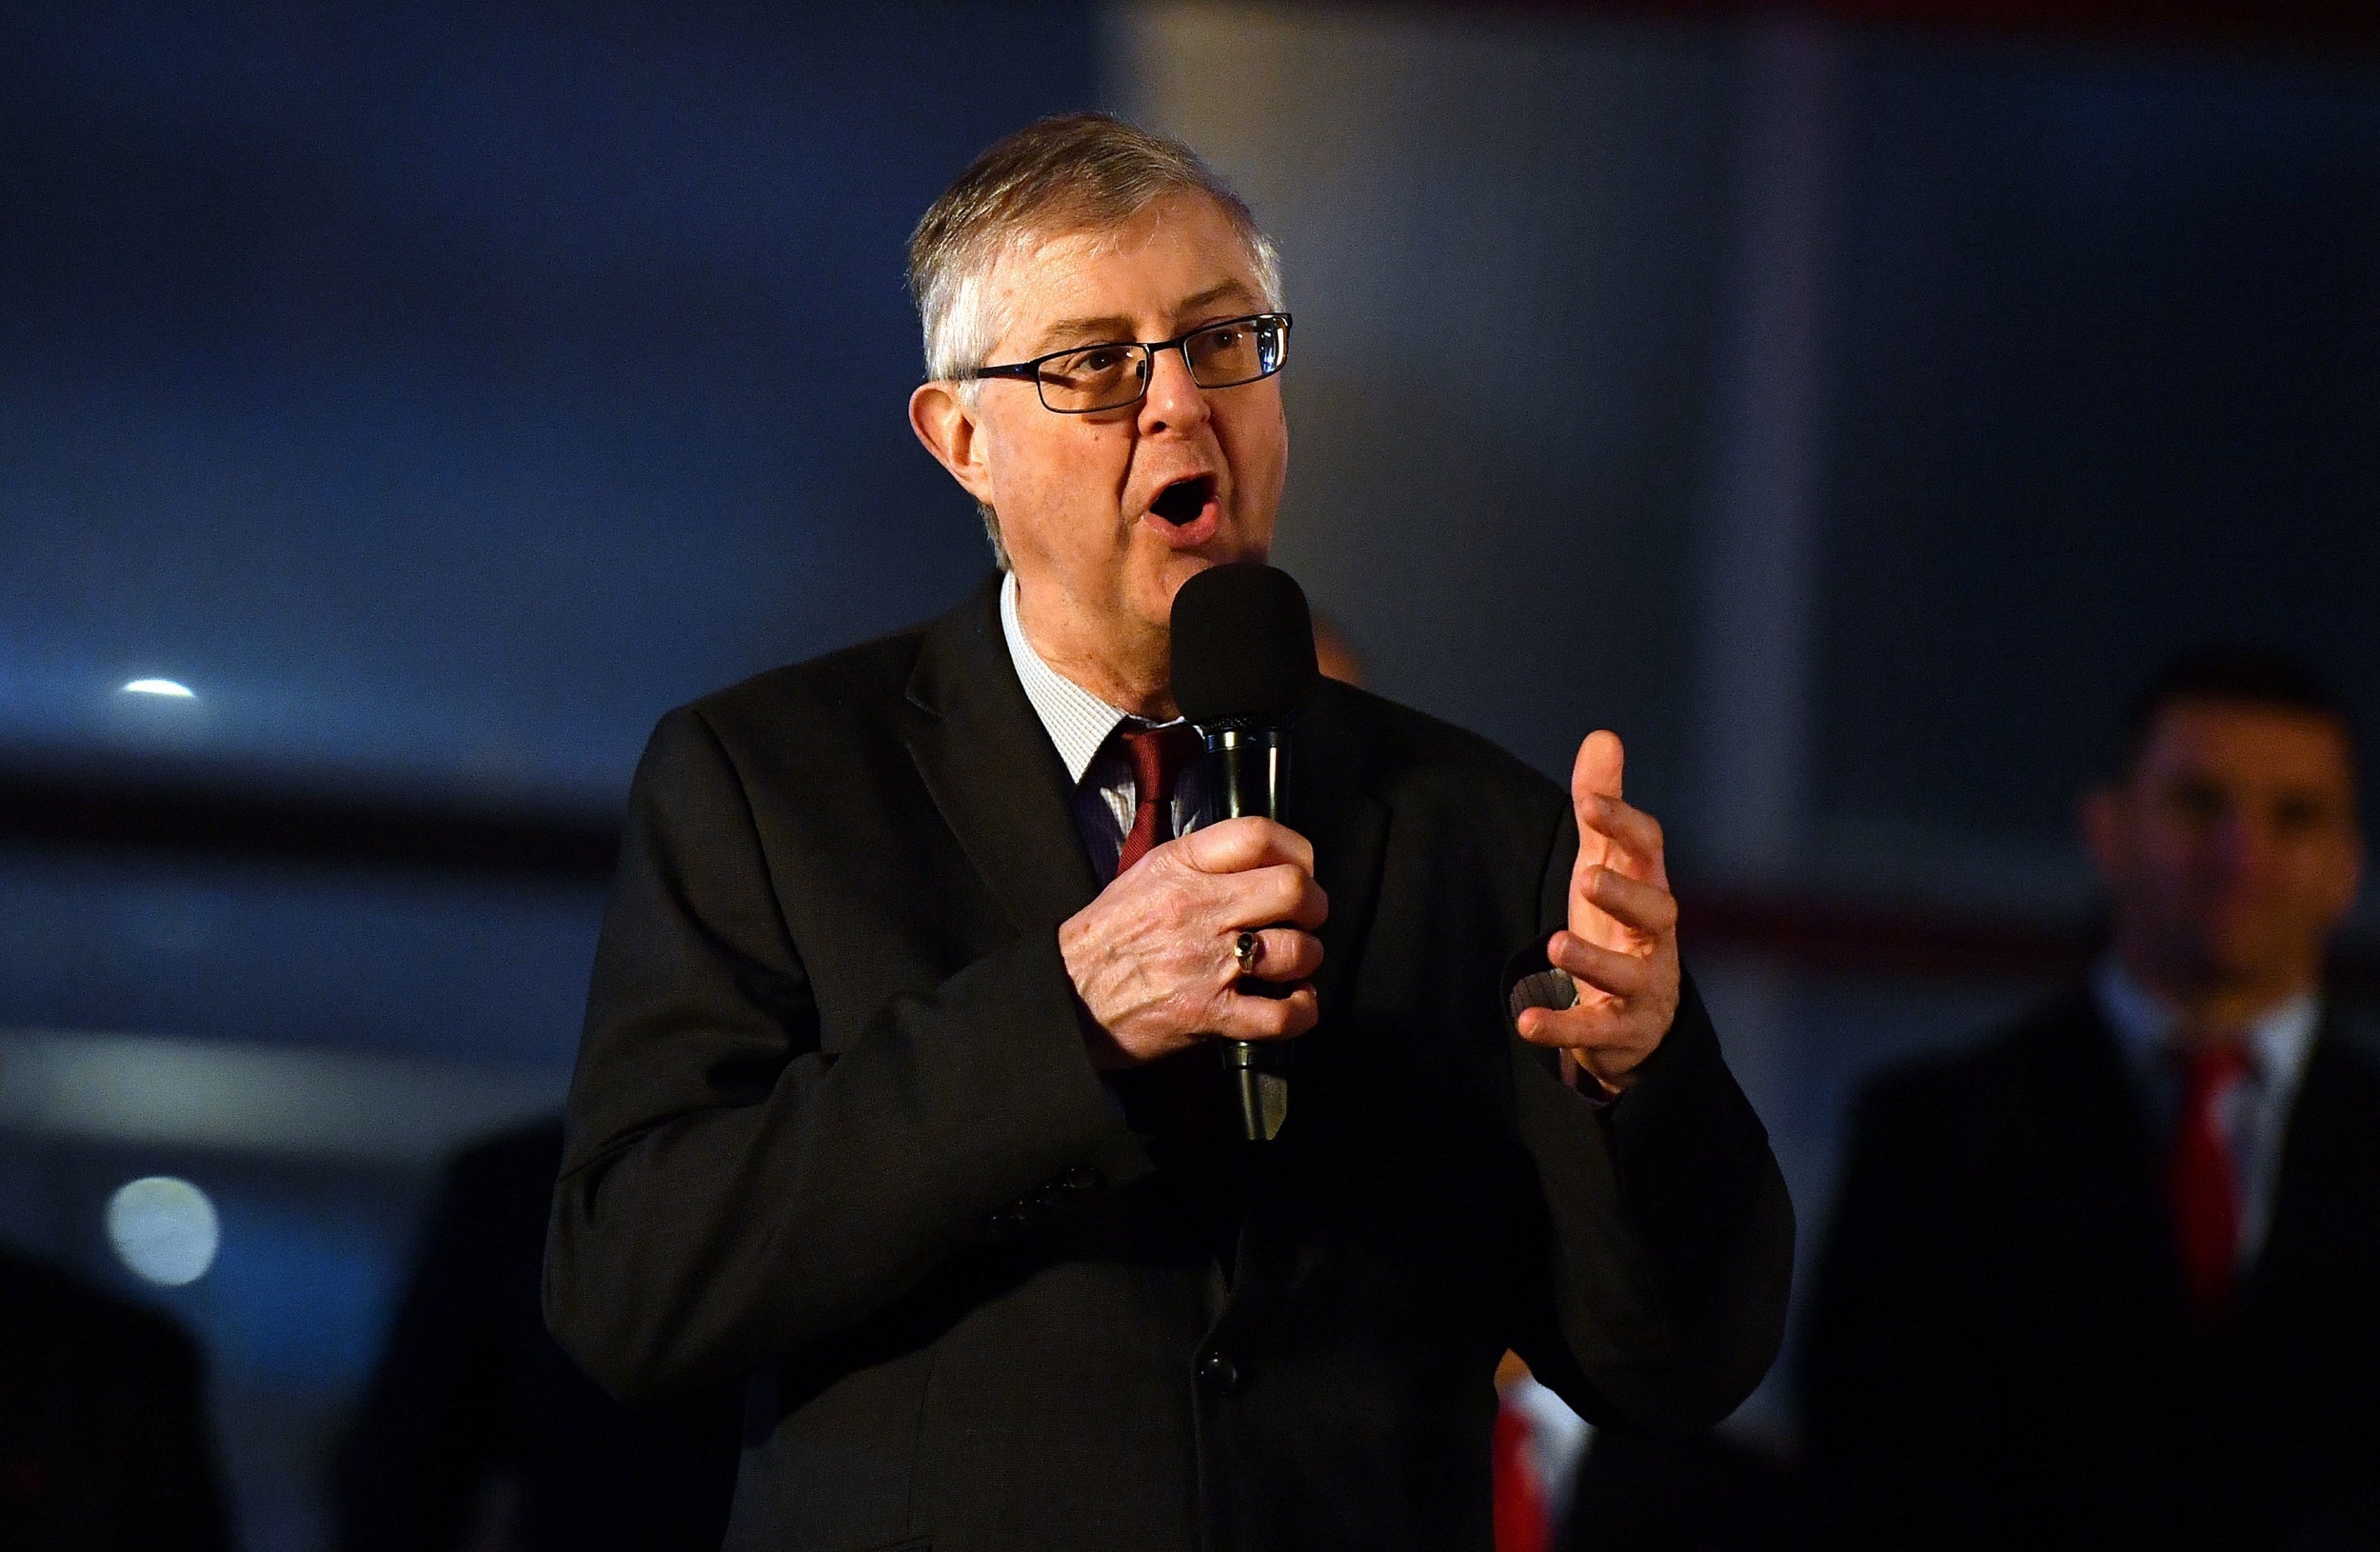 Welsh first minister Mark Drakeford warned no-deal Brexit would be “catastrophic”